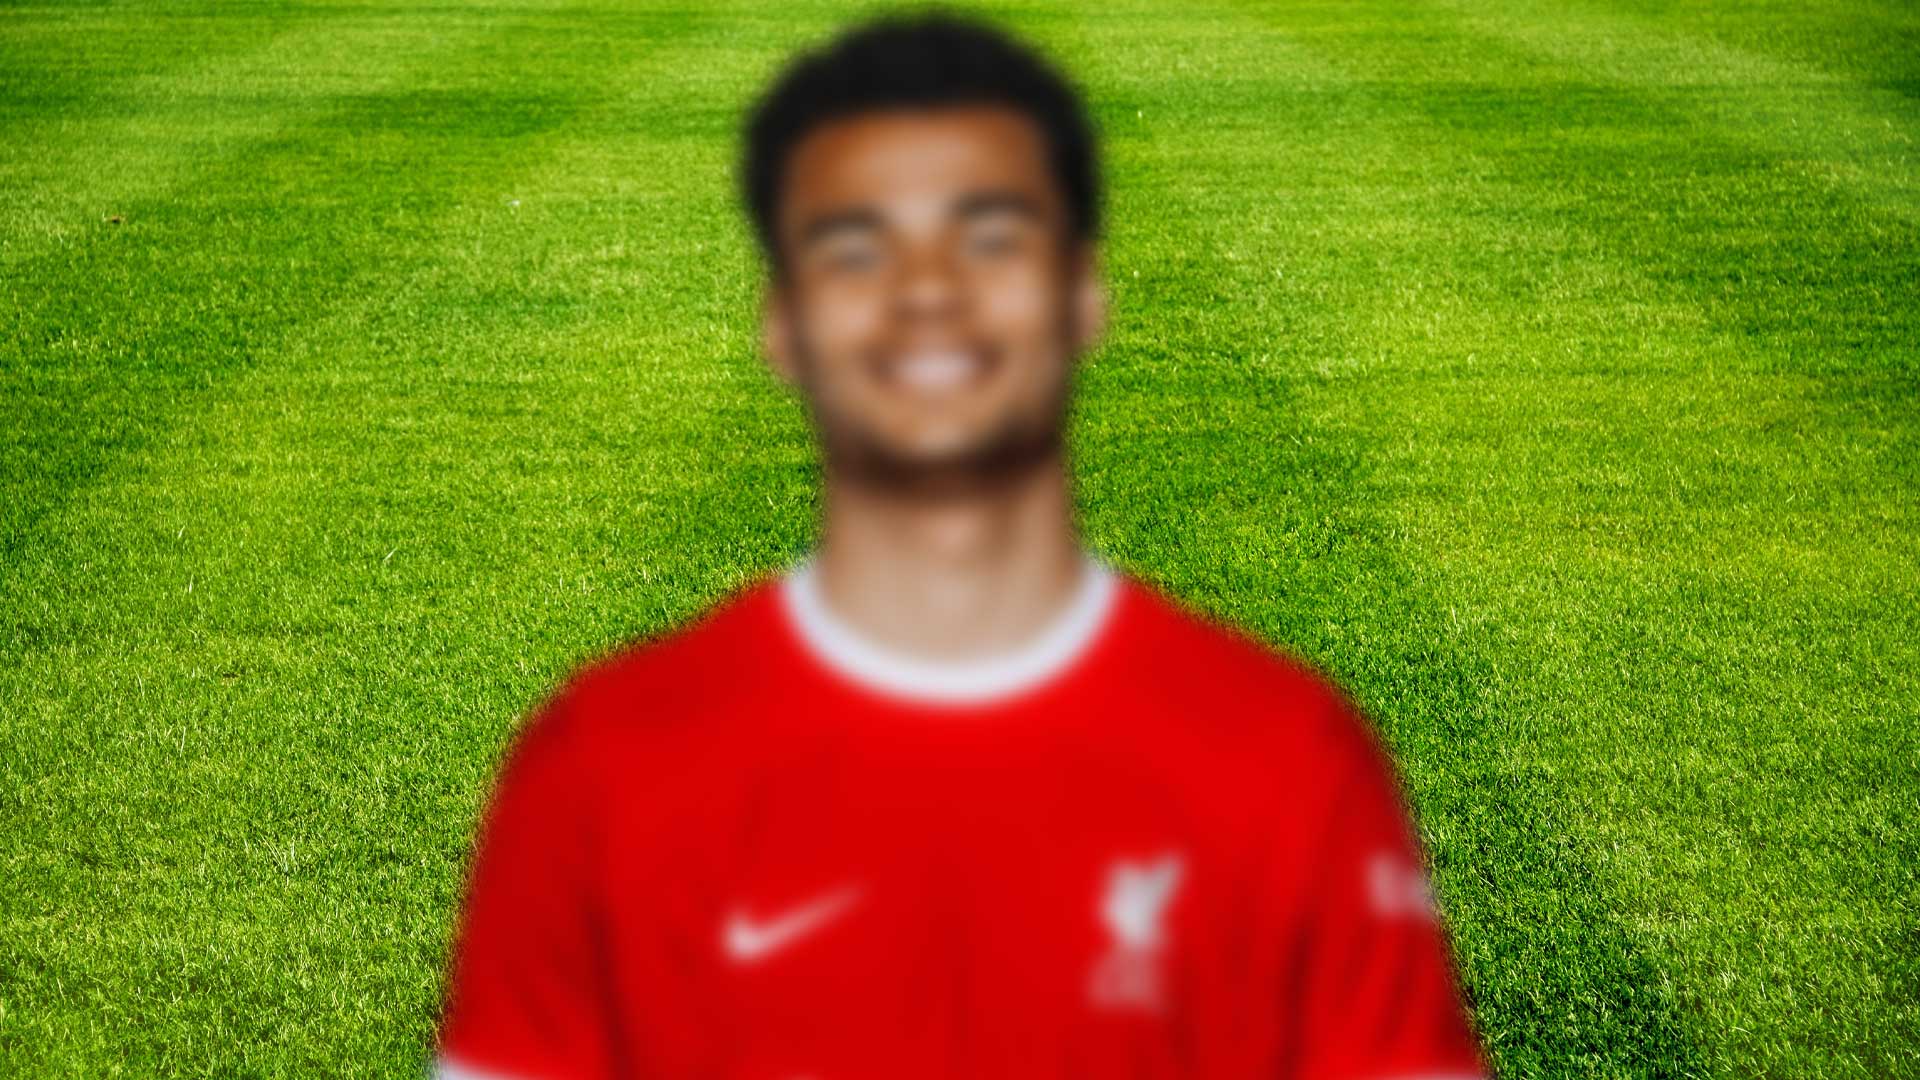 A blurred photo of a Liverpool player